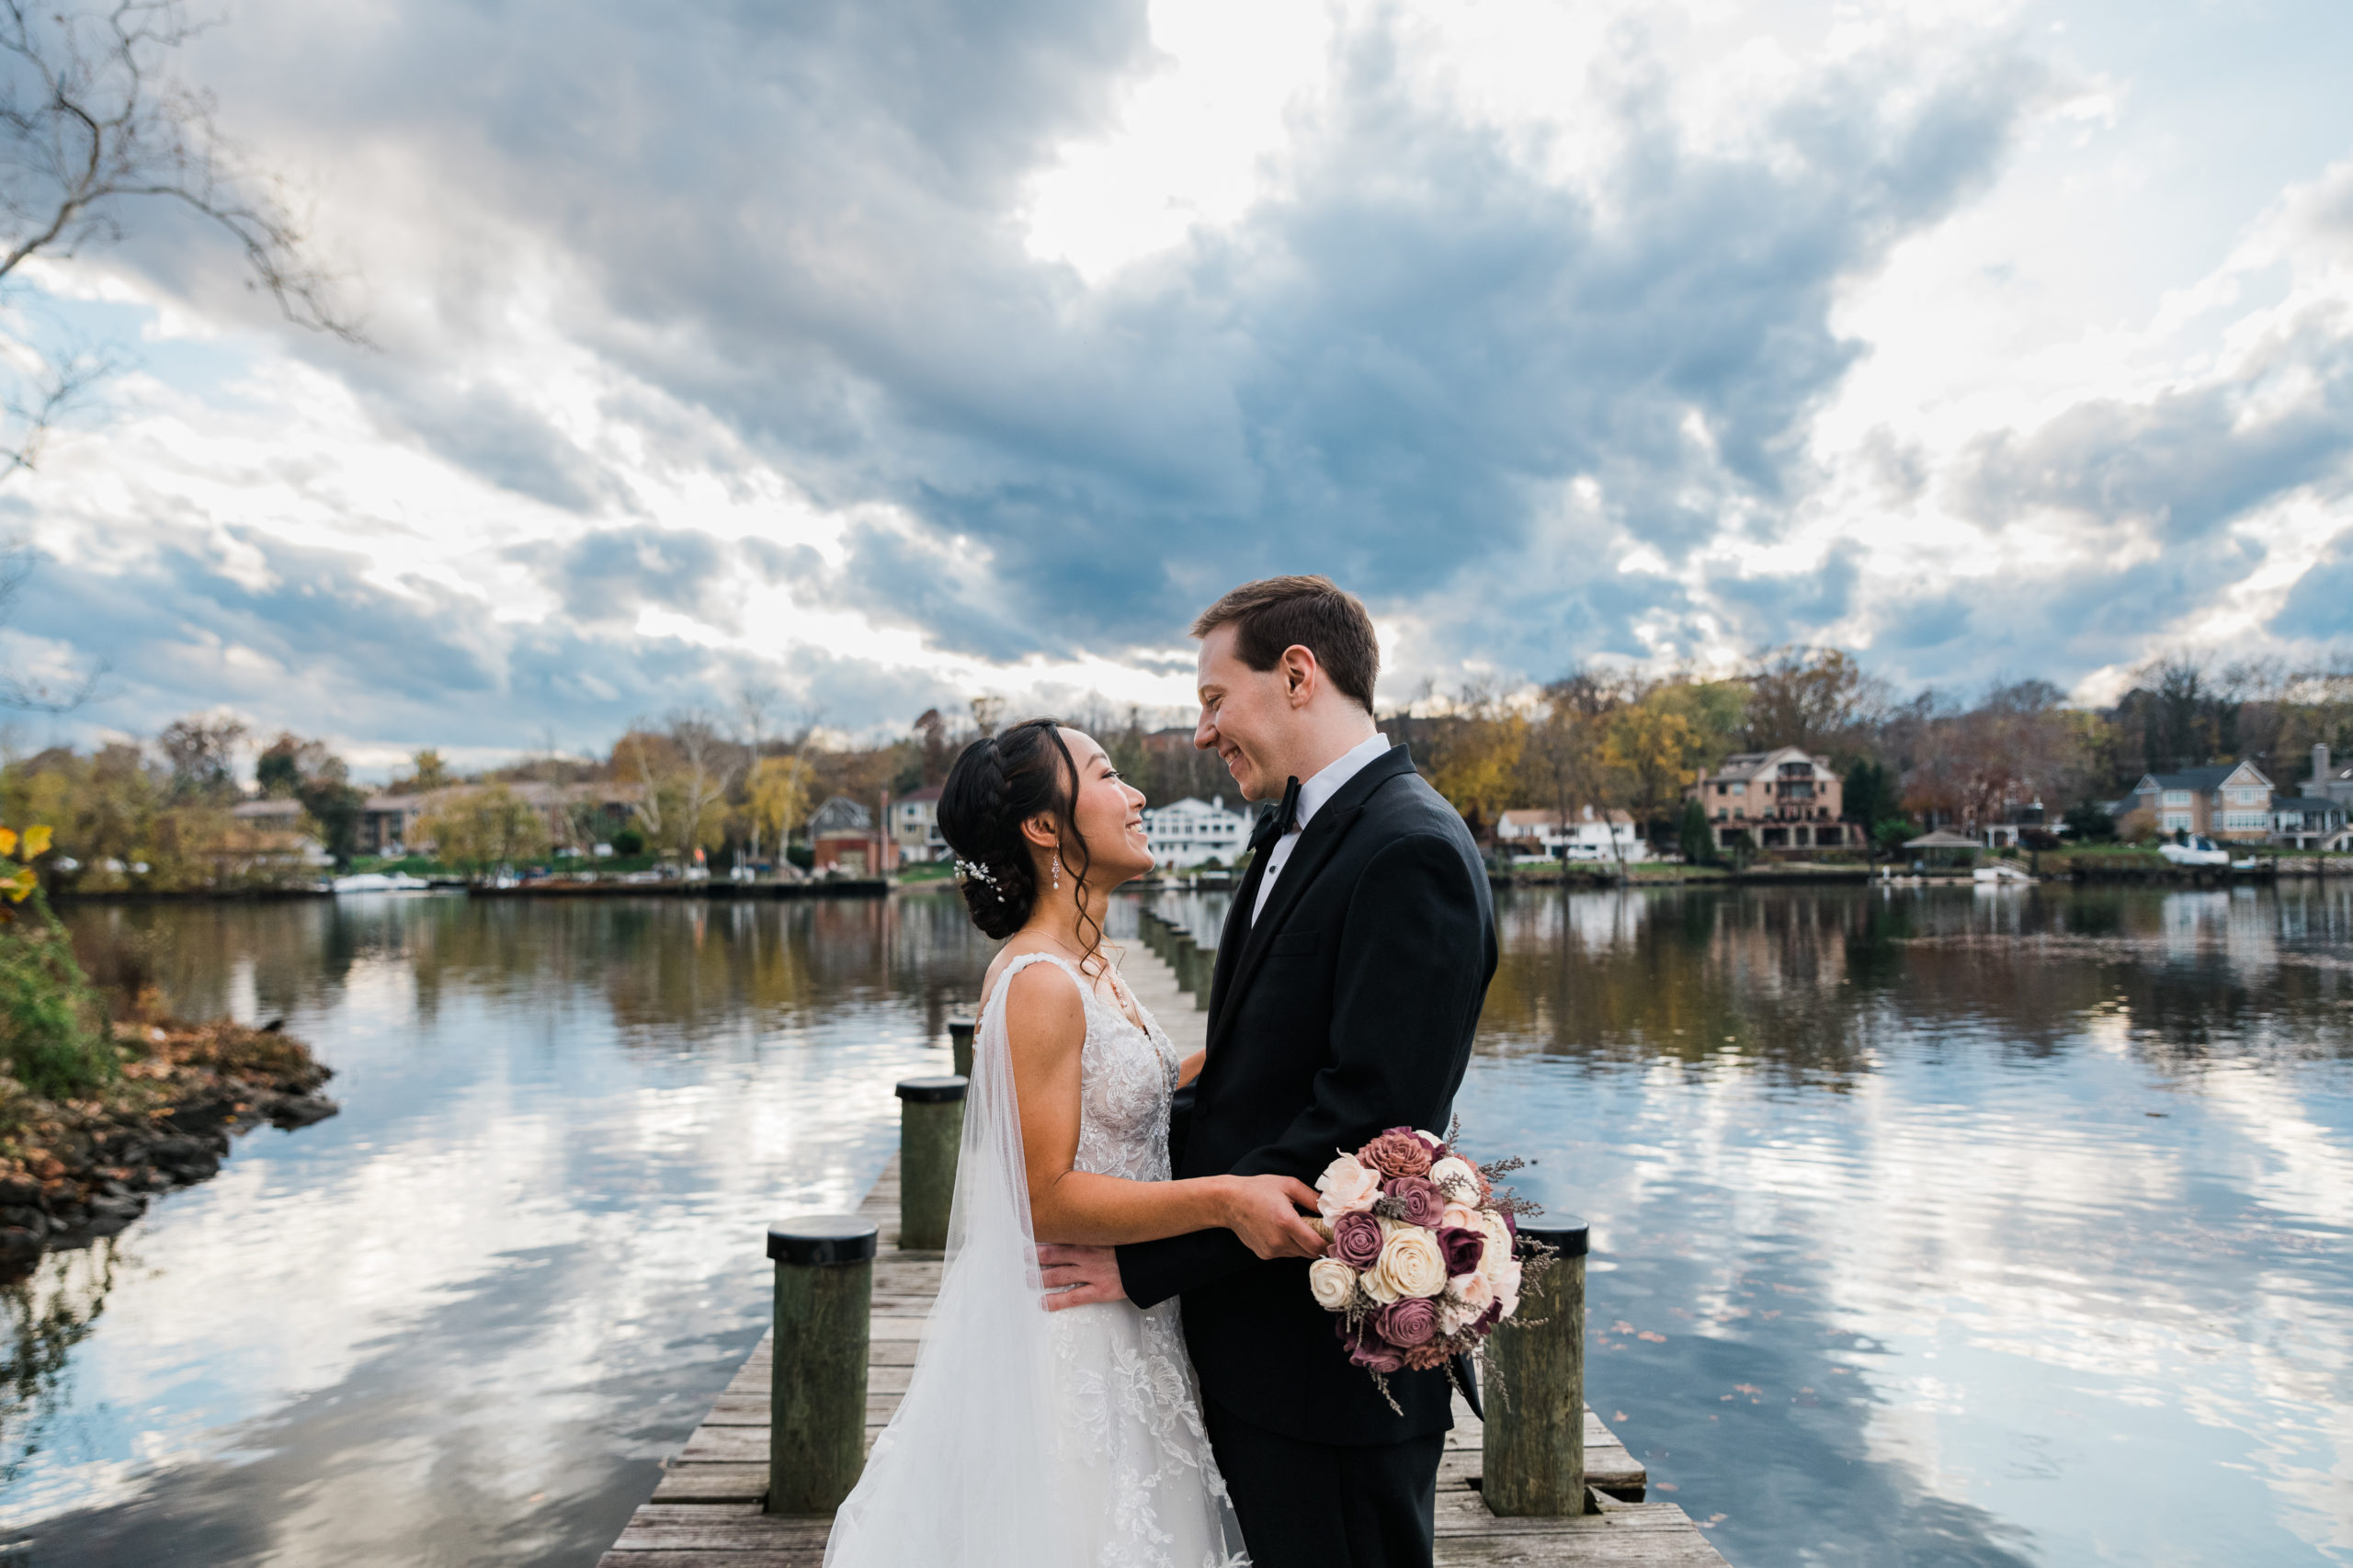 A bride and groom embraces in front of a lake